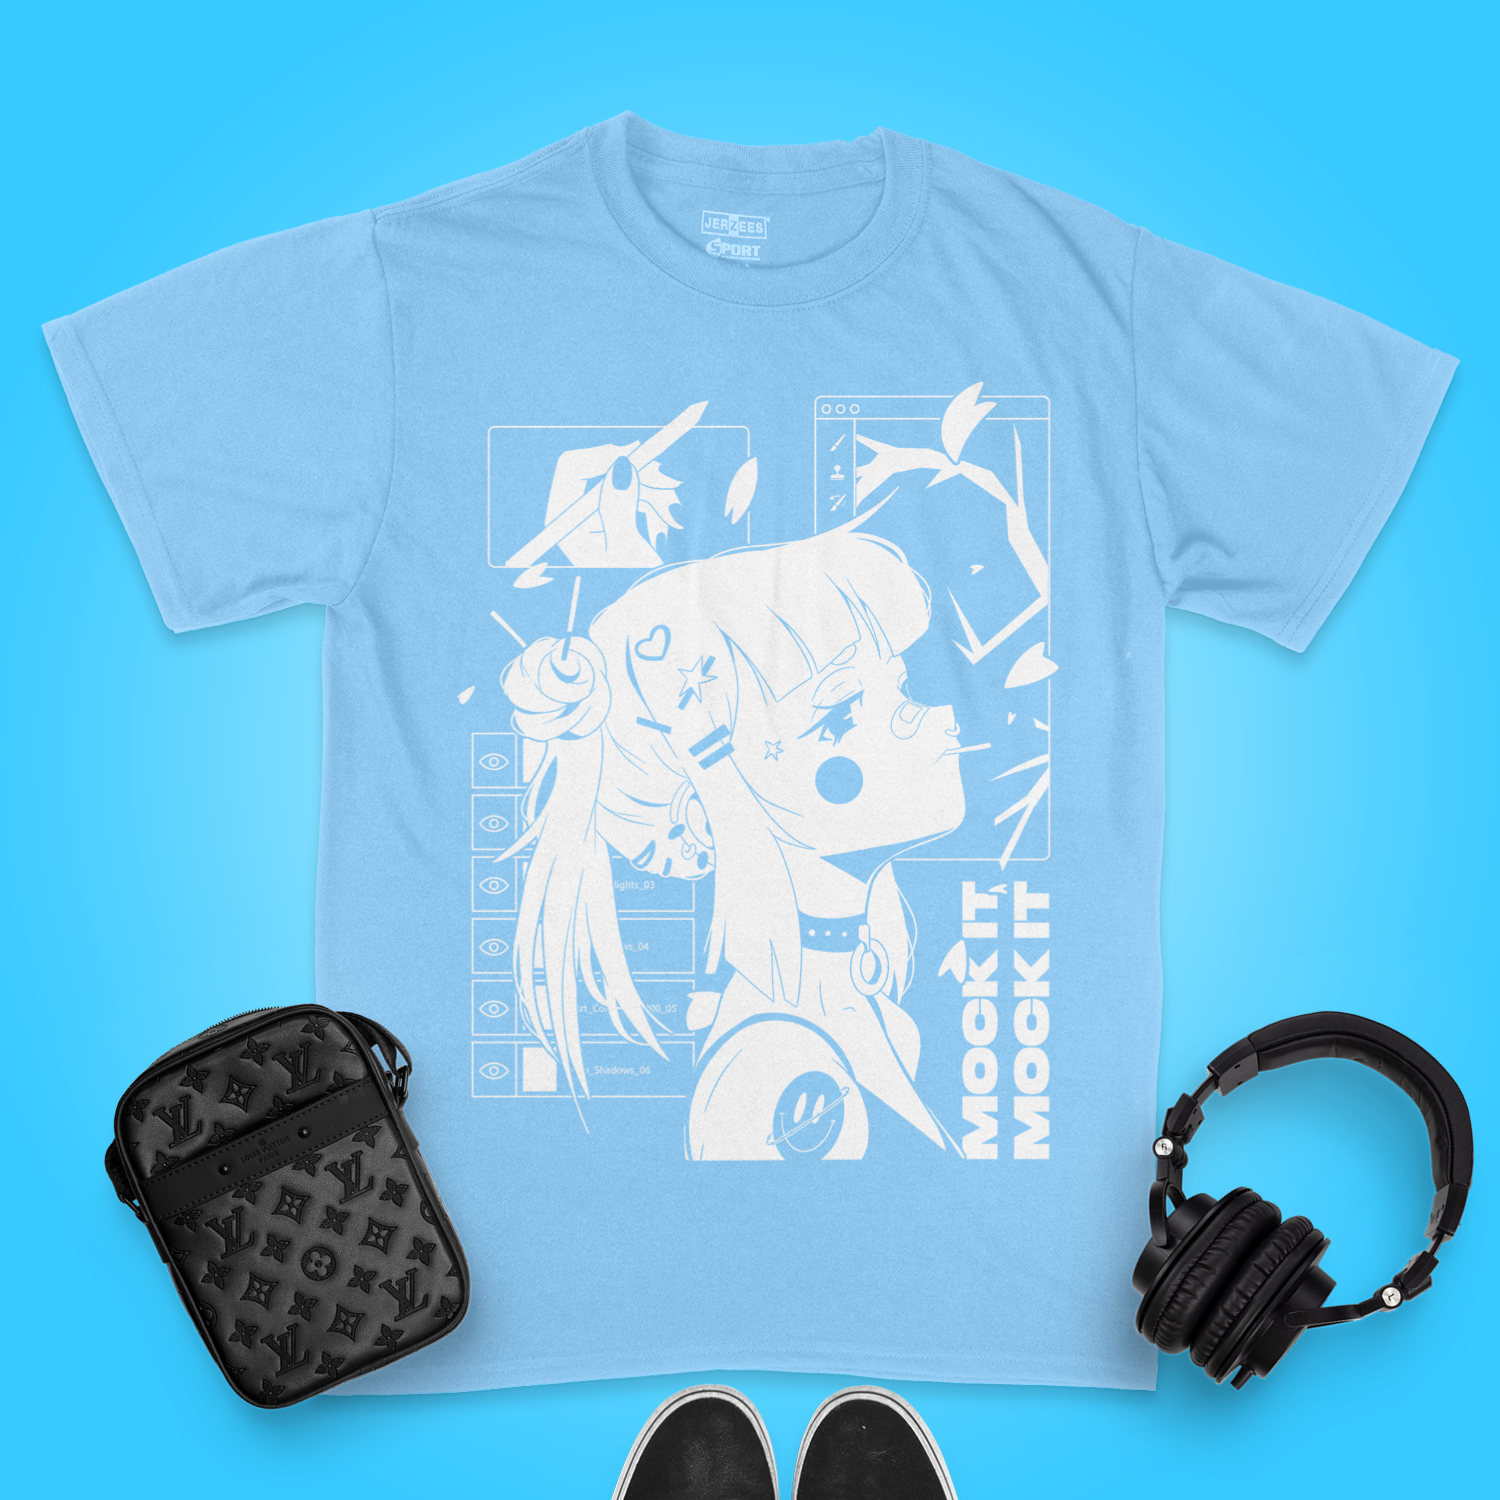 blue t-shirt mockup with bag, headphones and shoes